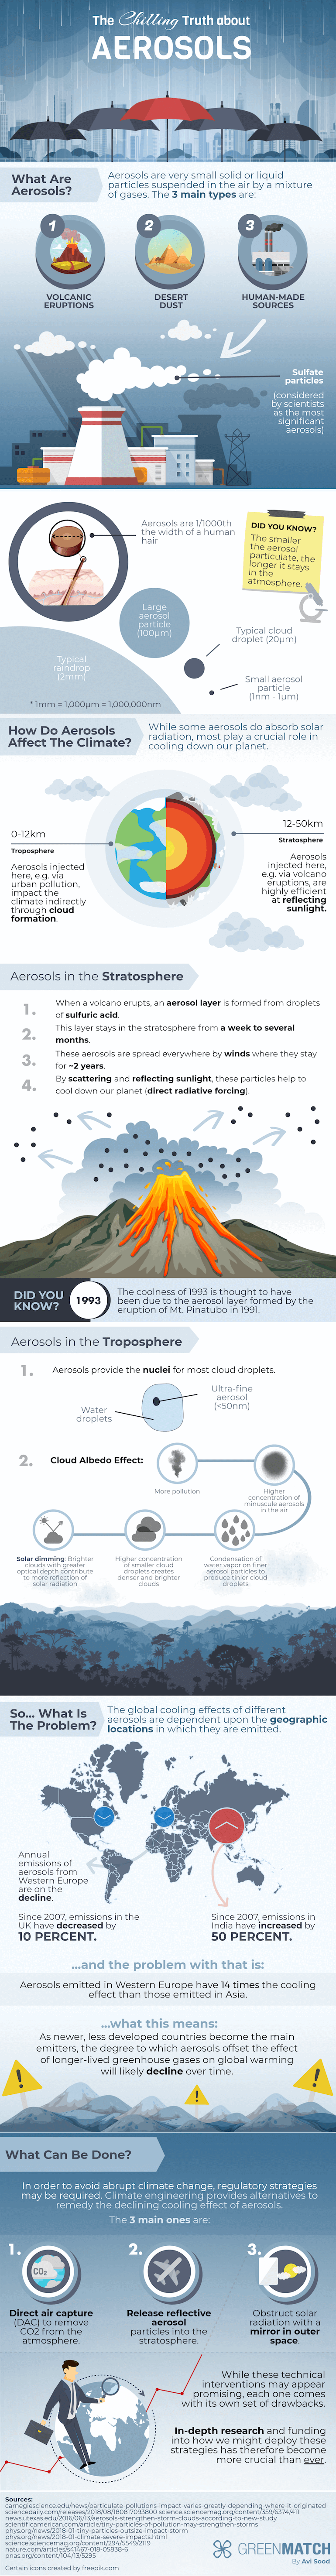 Infographic about aerosols and their impact on climate change